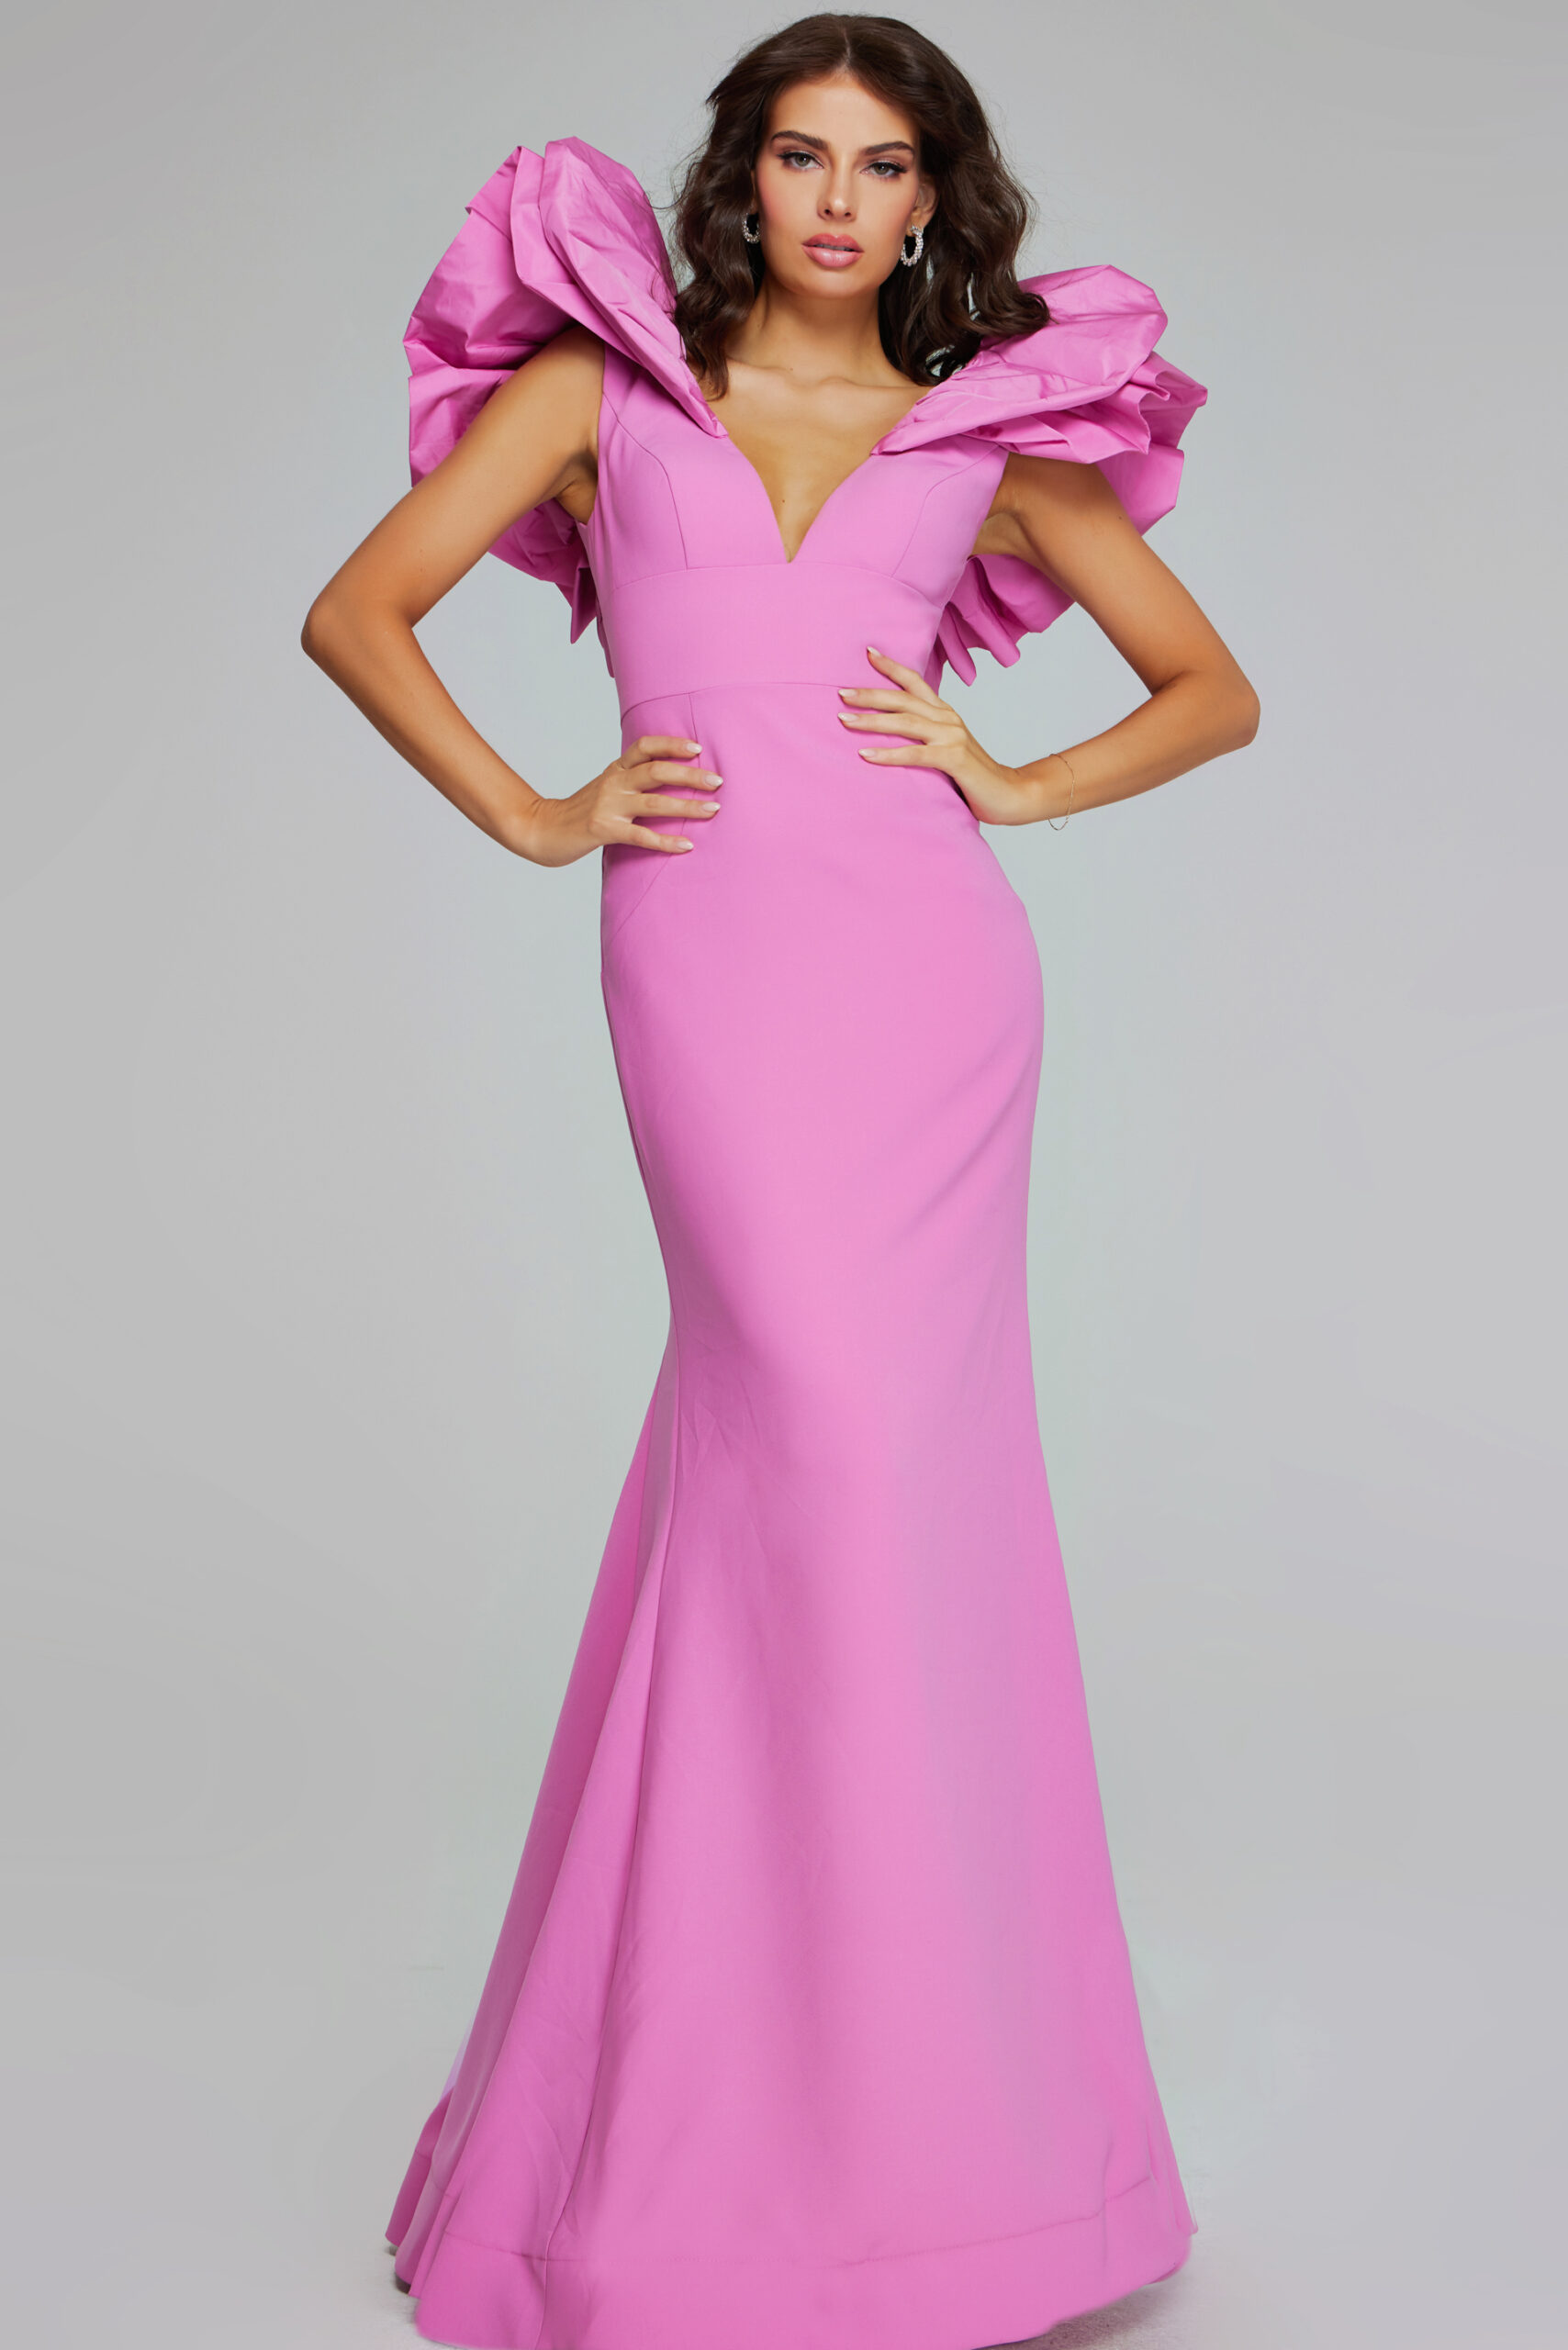 Model wearing Bold Rose Pink Gown with Dramatic Ruffled Shoulders 40663